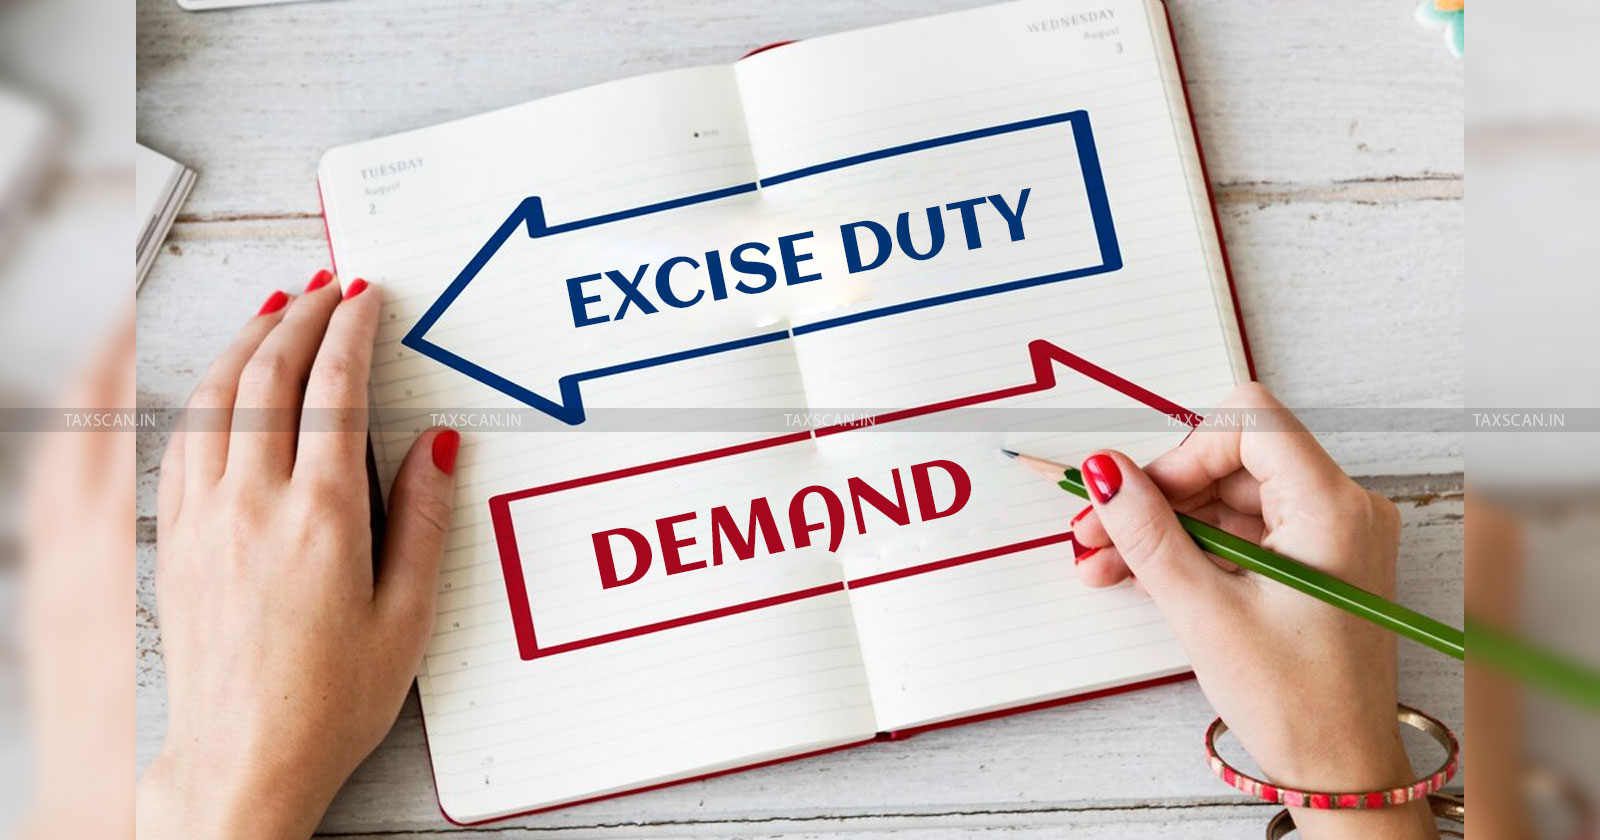 CESTAT - Demand of Penalty - Penalty and Interest - Excise Duty Demand - Excise Duty - Demand - TAXSCAN